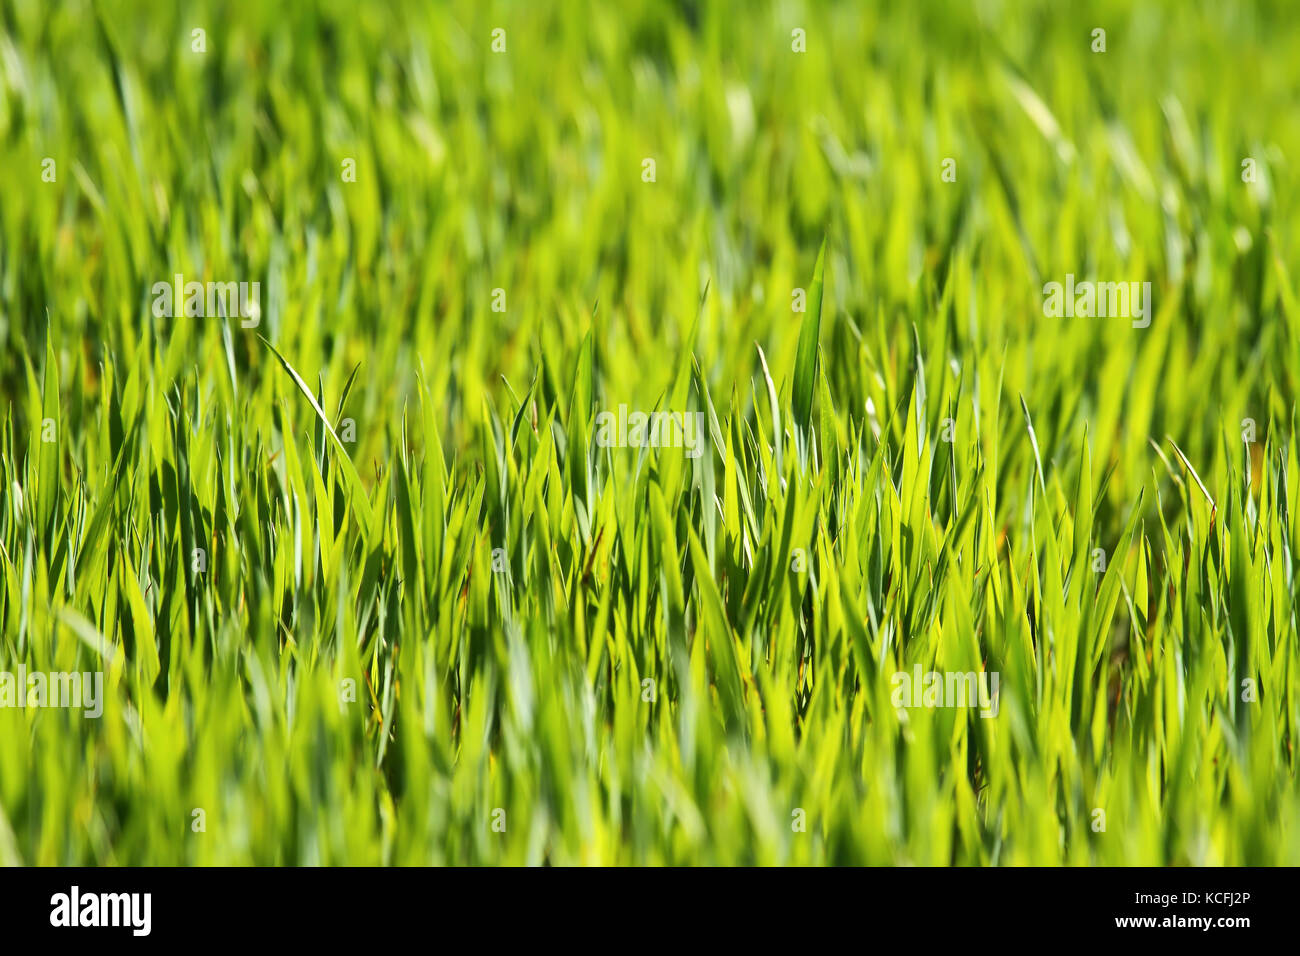 Green grass shining with the sun Stock Photo